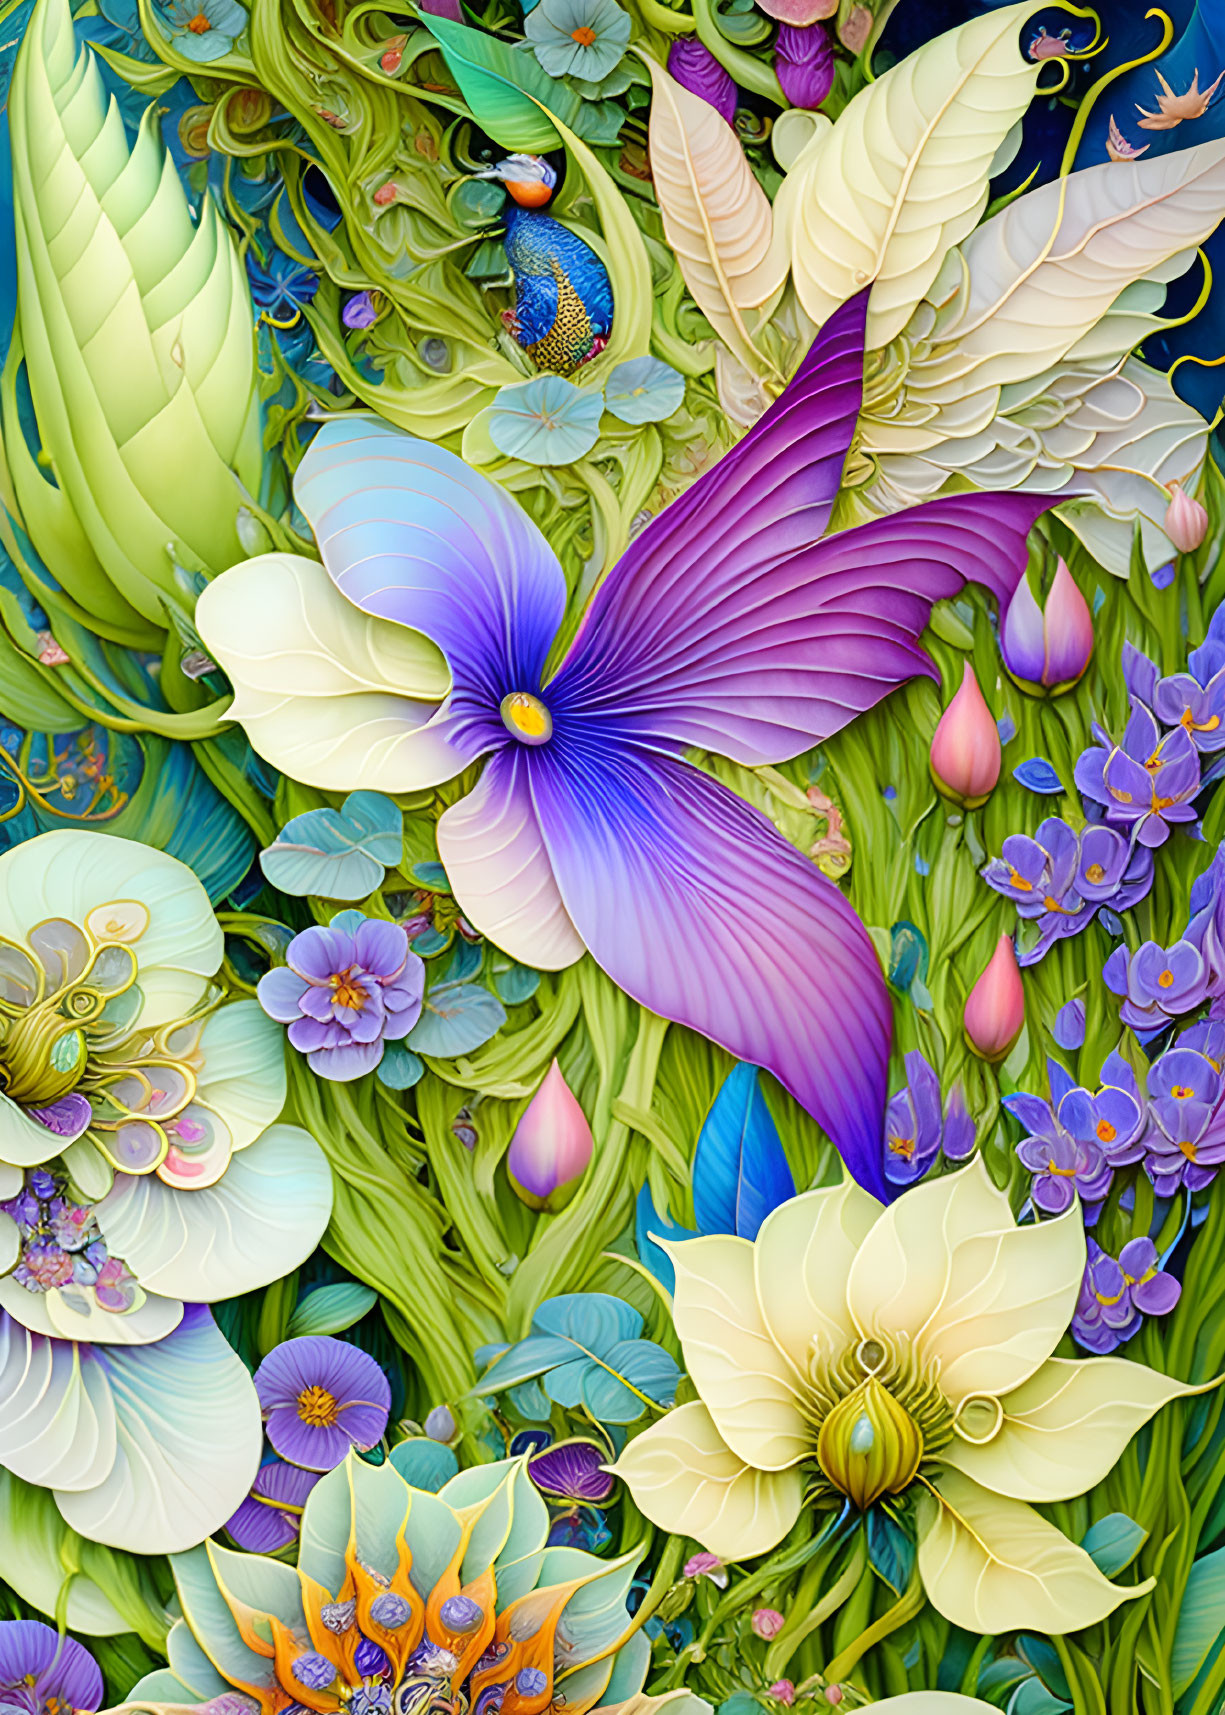 Colorful Floral Illustration with Butterfly and Lush Foliage